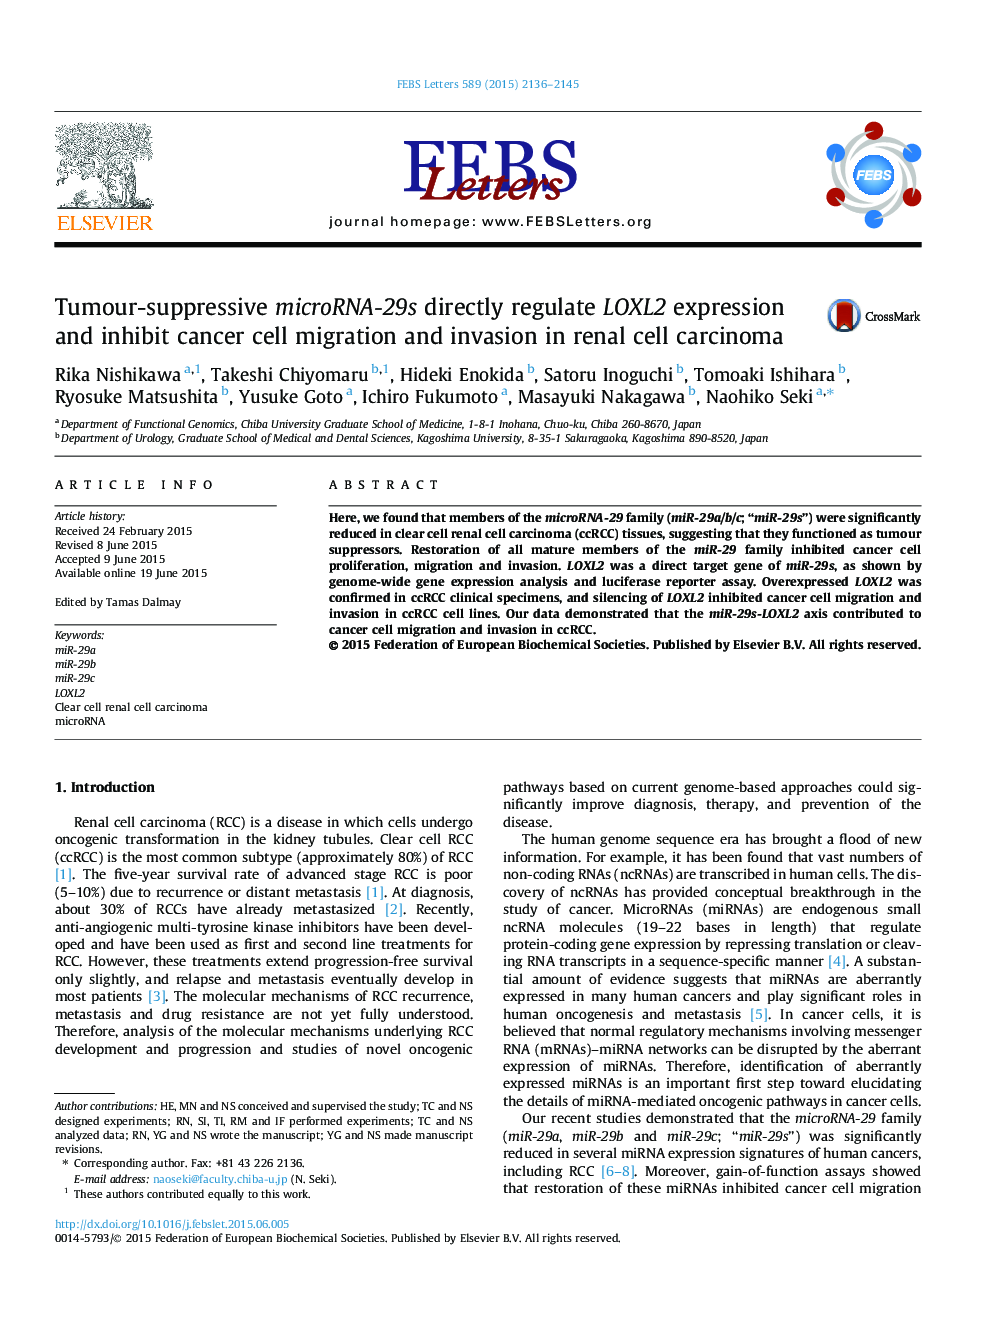 Tumour-suppressive microRNA-29s directly regulate LOXL2 expression and inhibit cancer cell migration and invasion in renal cell carcinoma